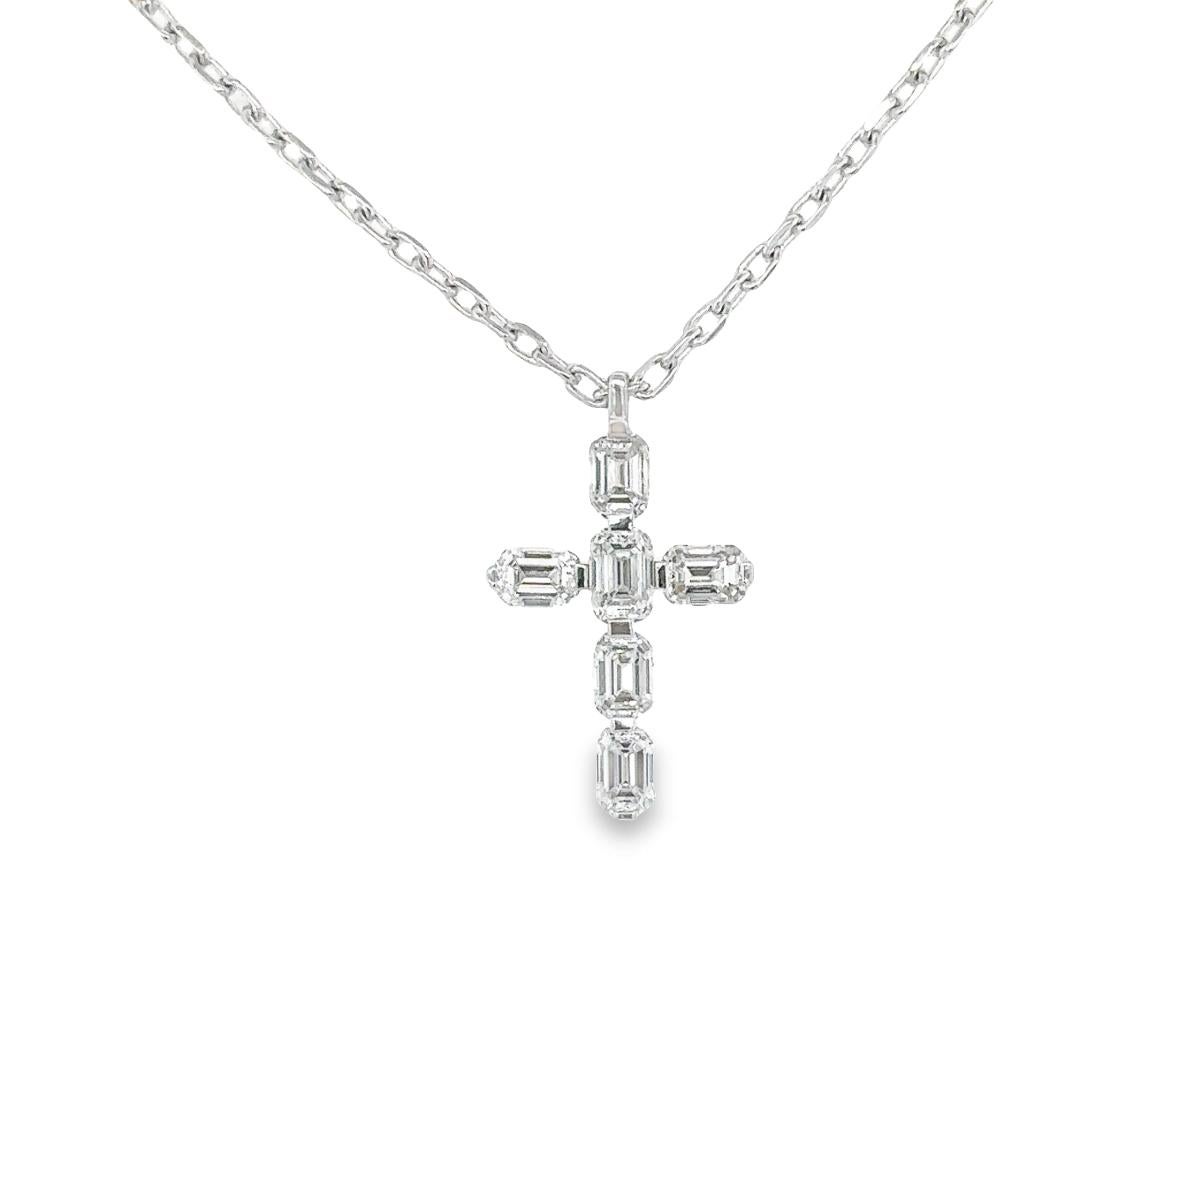 	TIMELESS Necklace Cross in white gold 18Kt 3.89 gr with 6 Emerald Cut Diamonds G Color VS Clarity in total 0.71 ct

The Timeless Collection was inspired by the endless elegance and sophistication of classic high-jewelry, eternising it’s beauty and